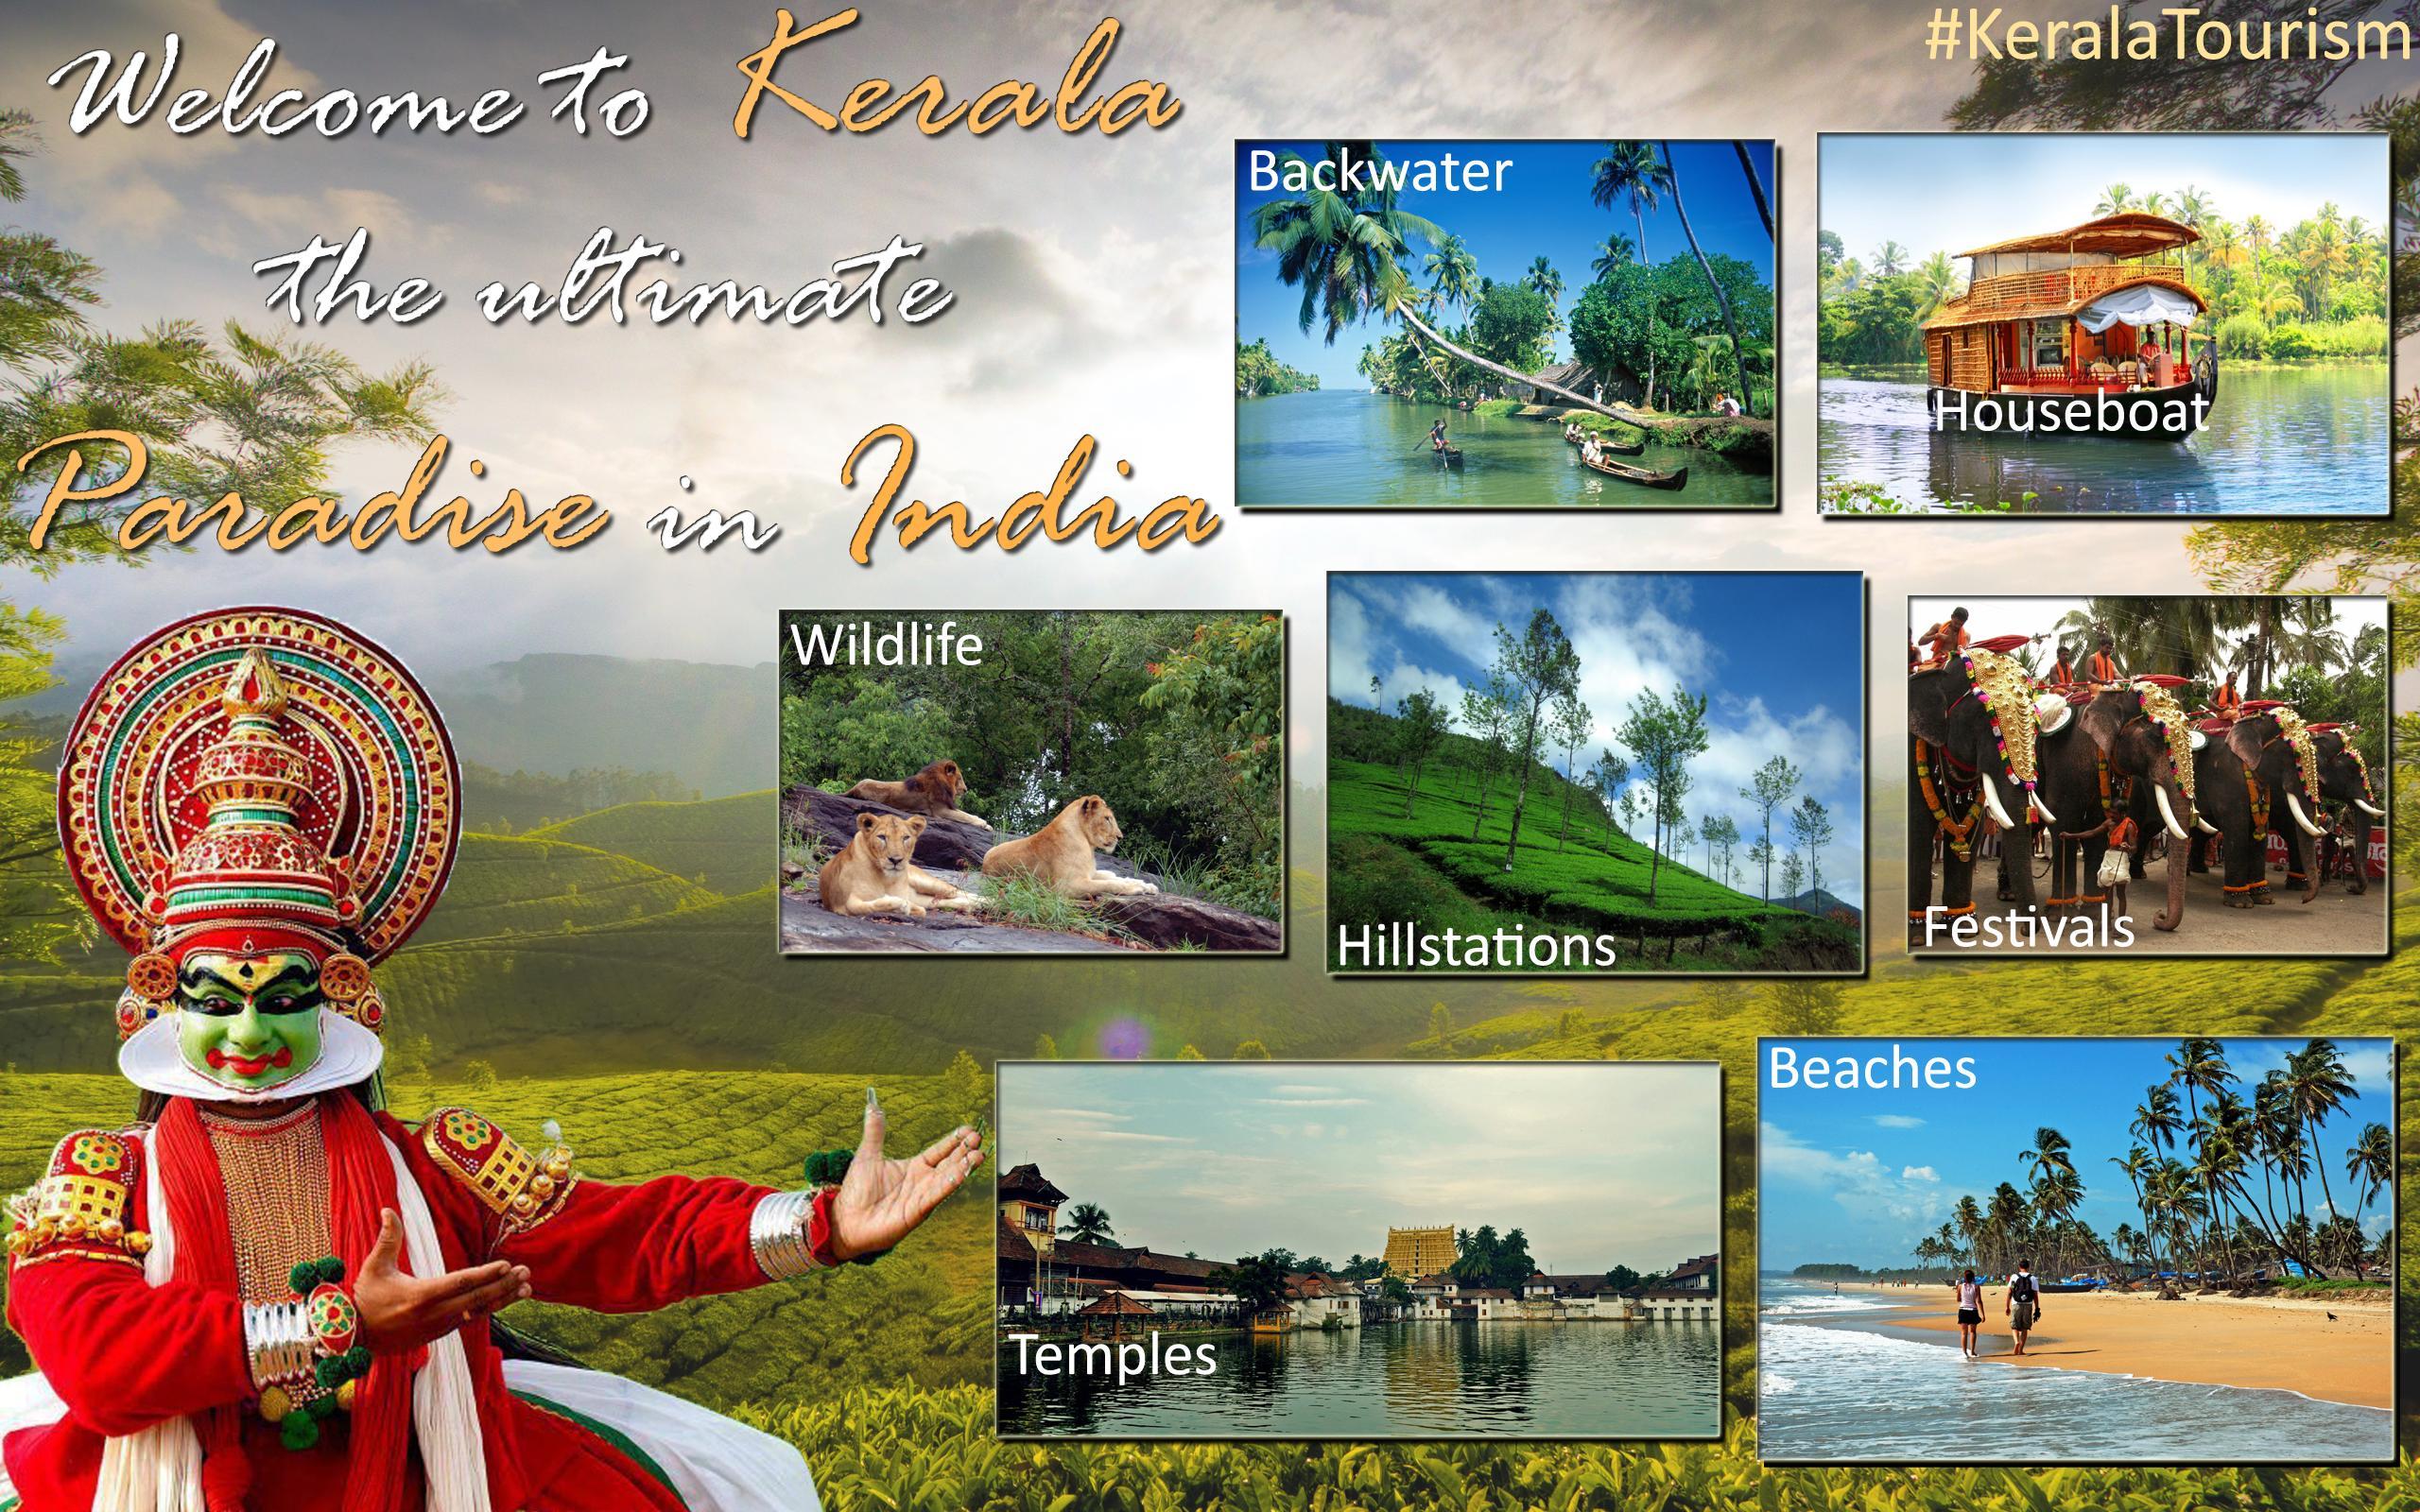 Kerala tourism- A symbol of excellence